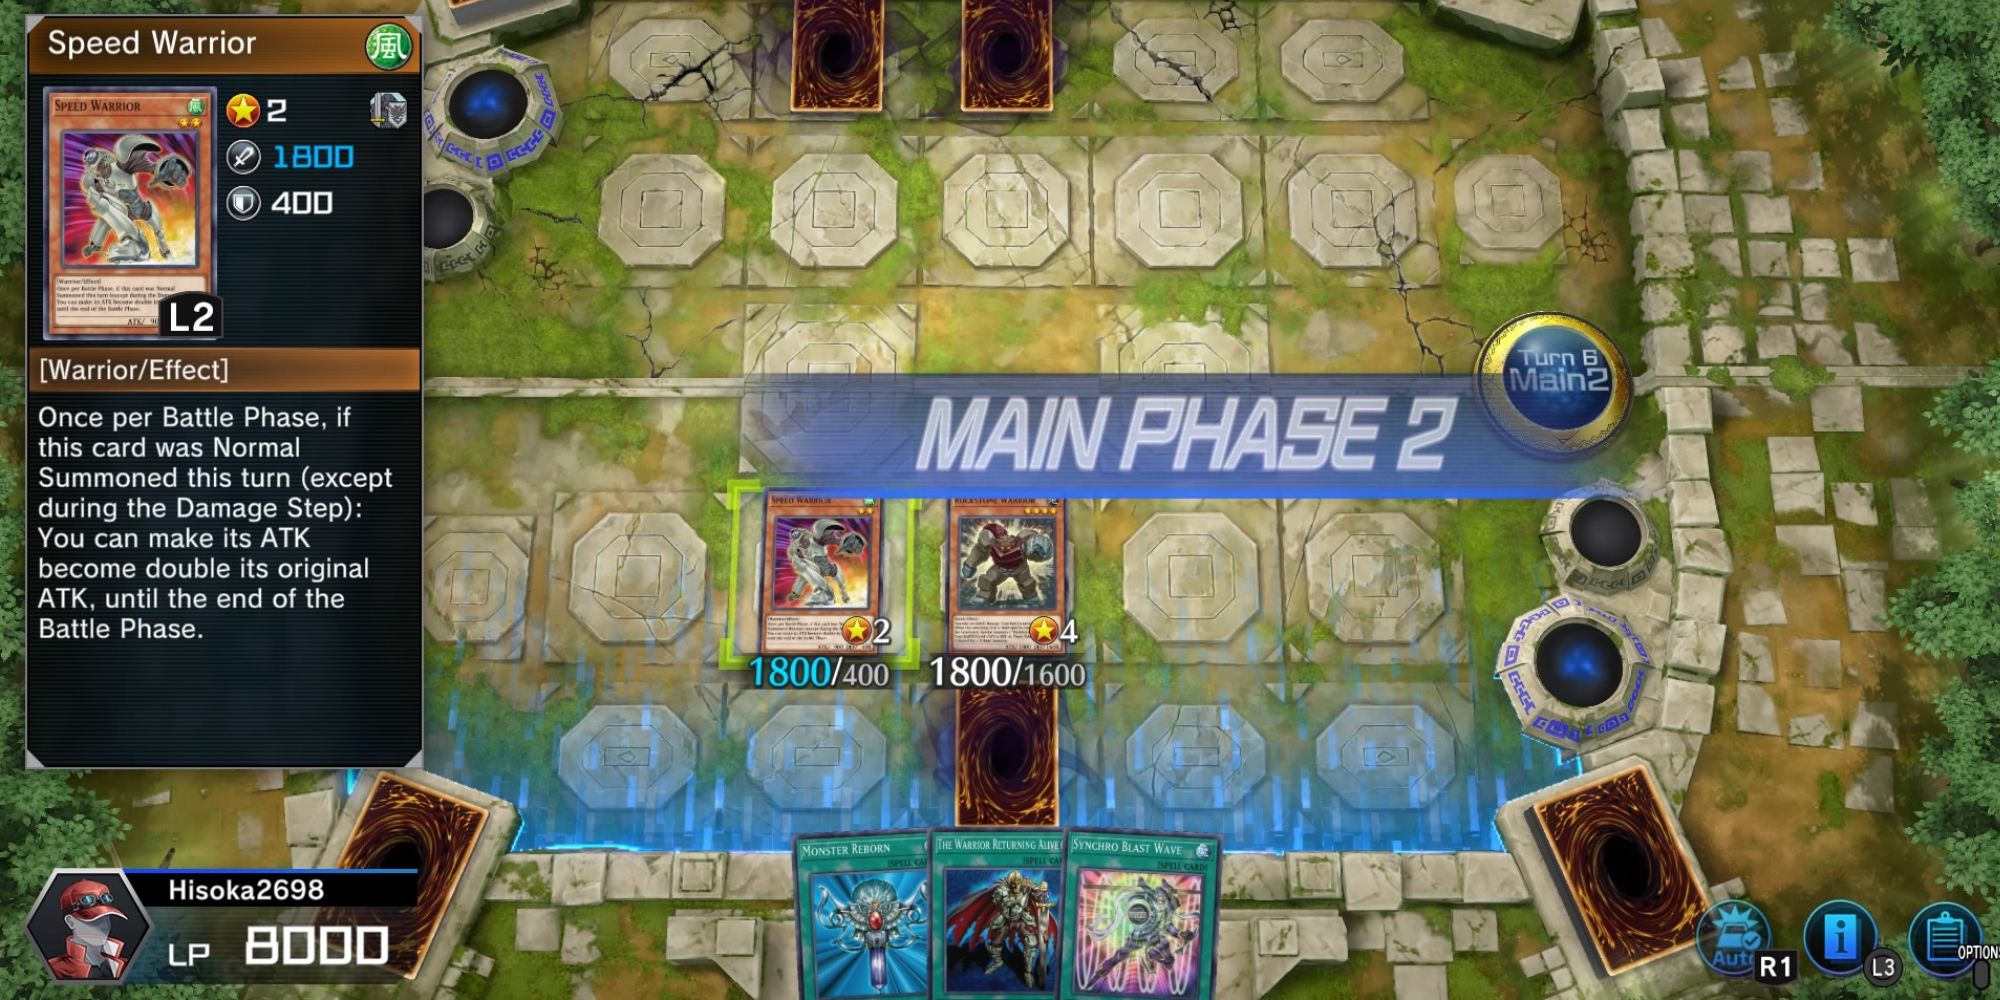 Yu-Gi-Oh! Master Duel a shot of the player board with the player's hand in the forefront, a description of a highlighted card on the left and the word "Main Phase 2" running across the screen